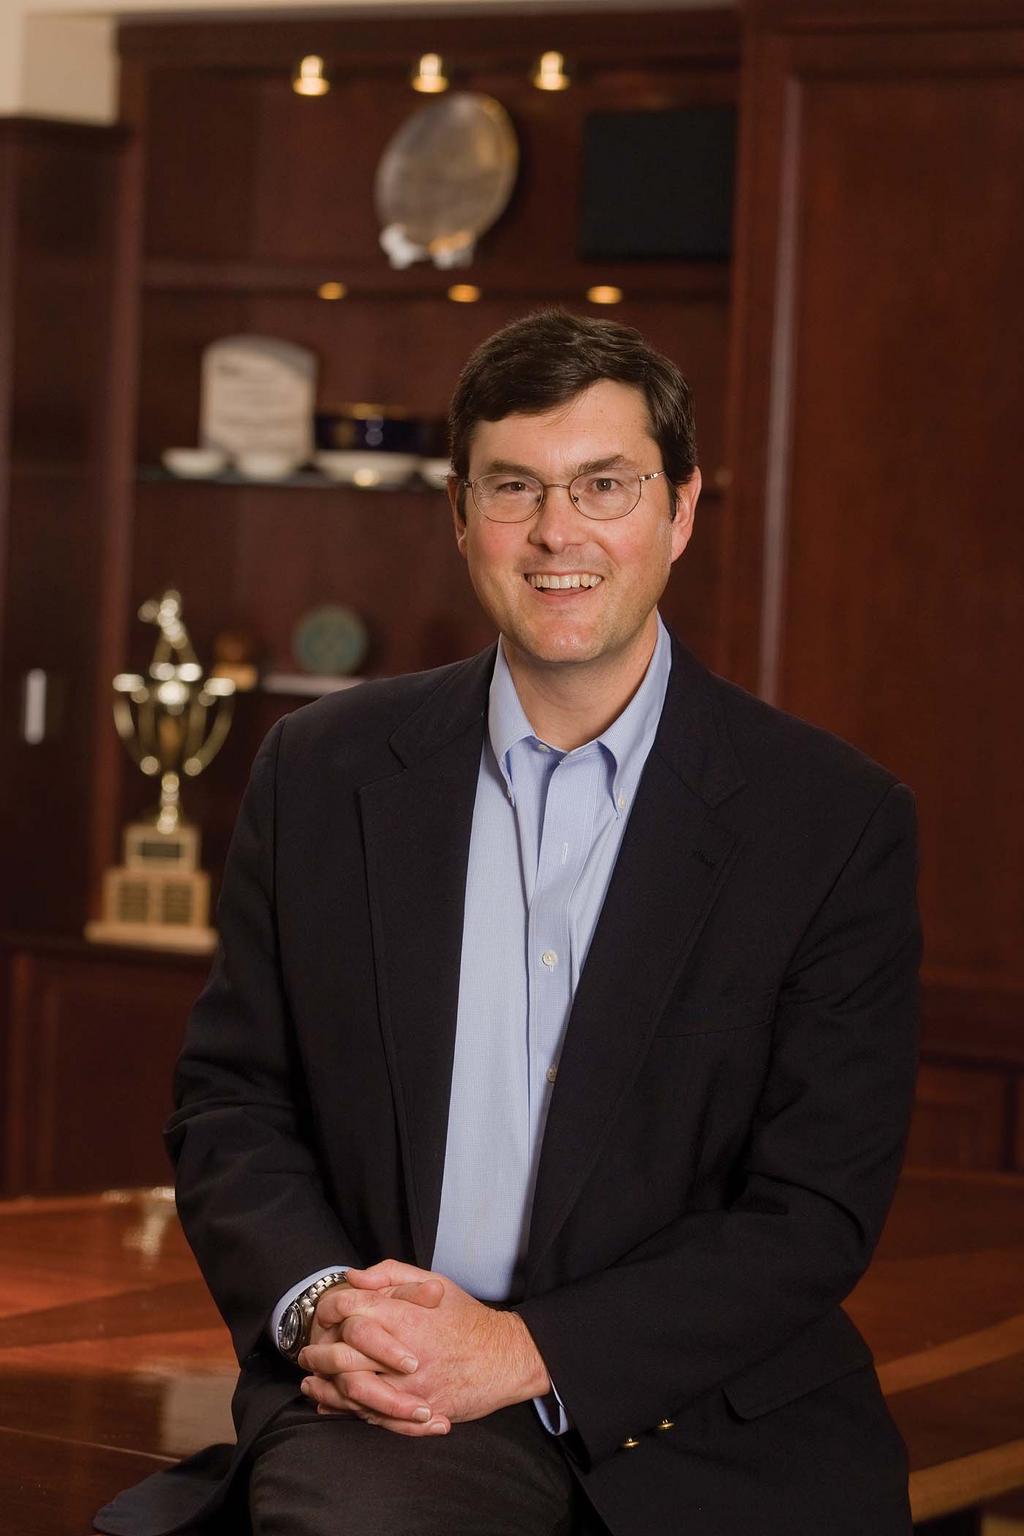 Bob Nutting might purchase bankrupt newspaper - Pittsburgh